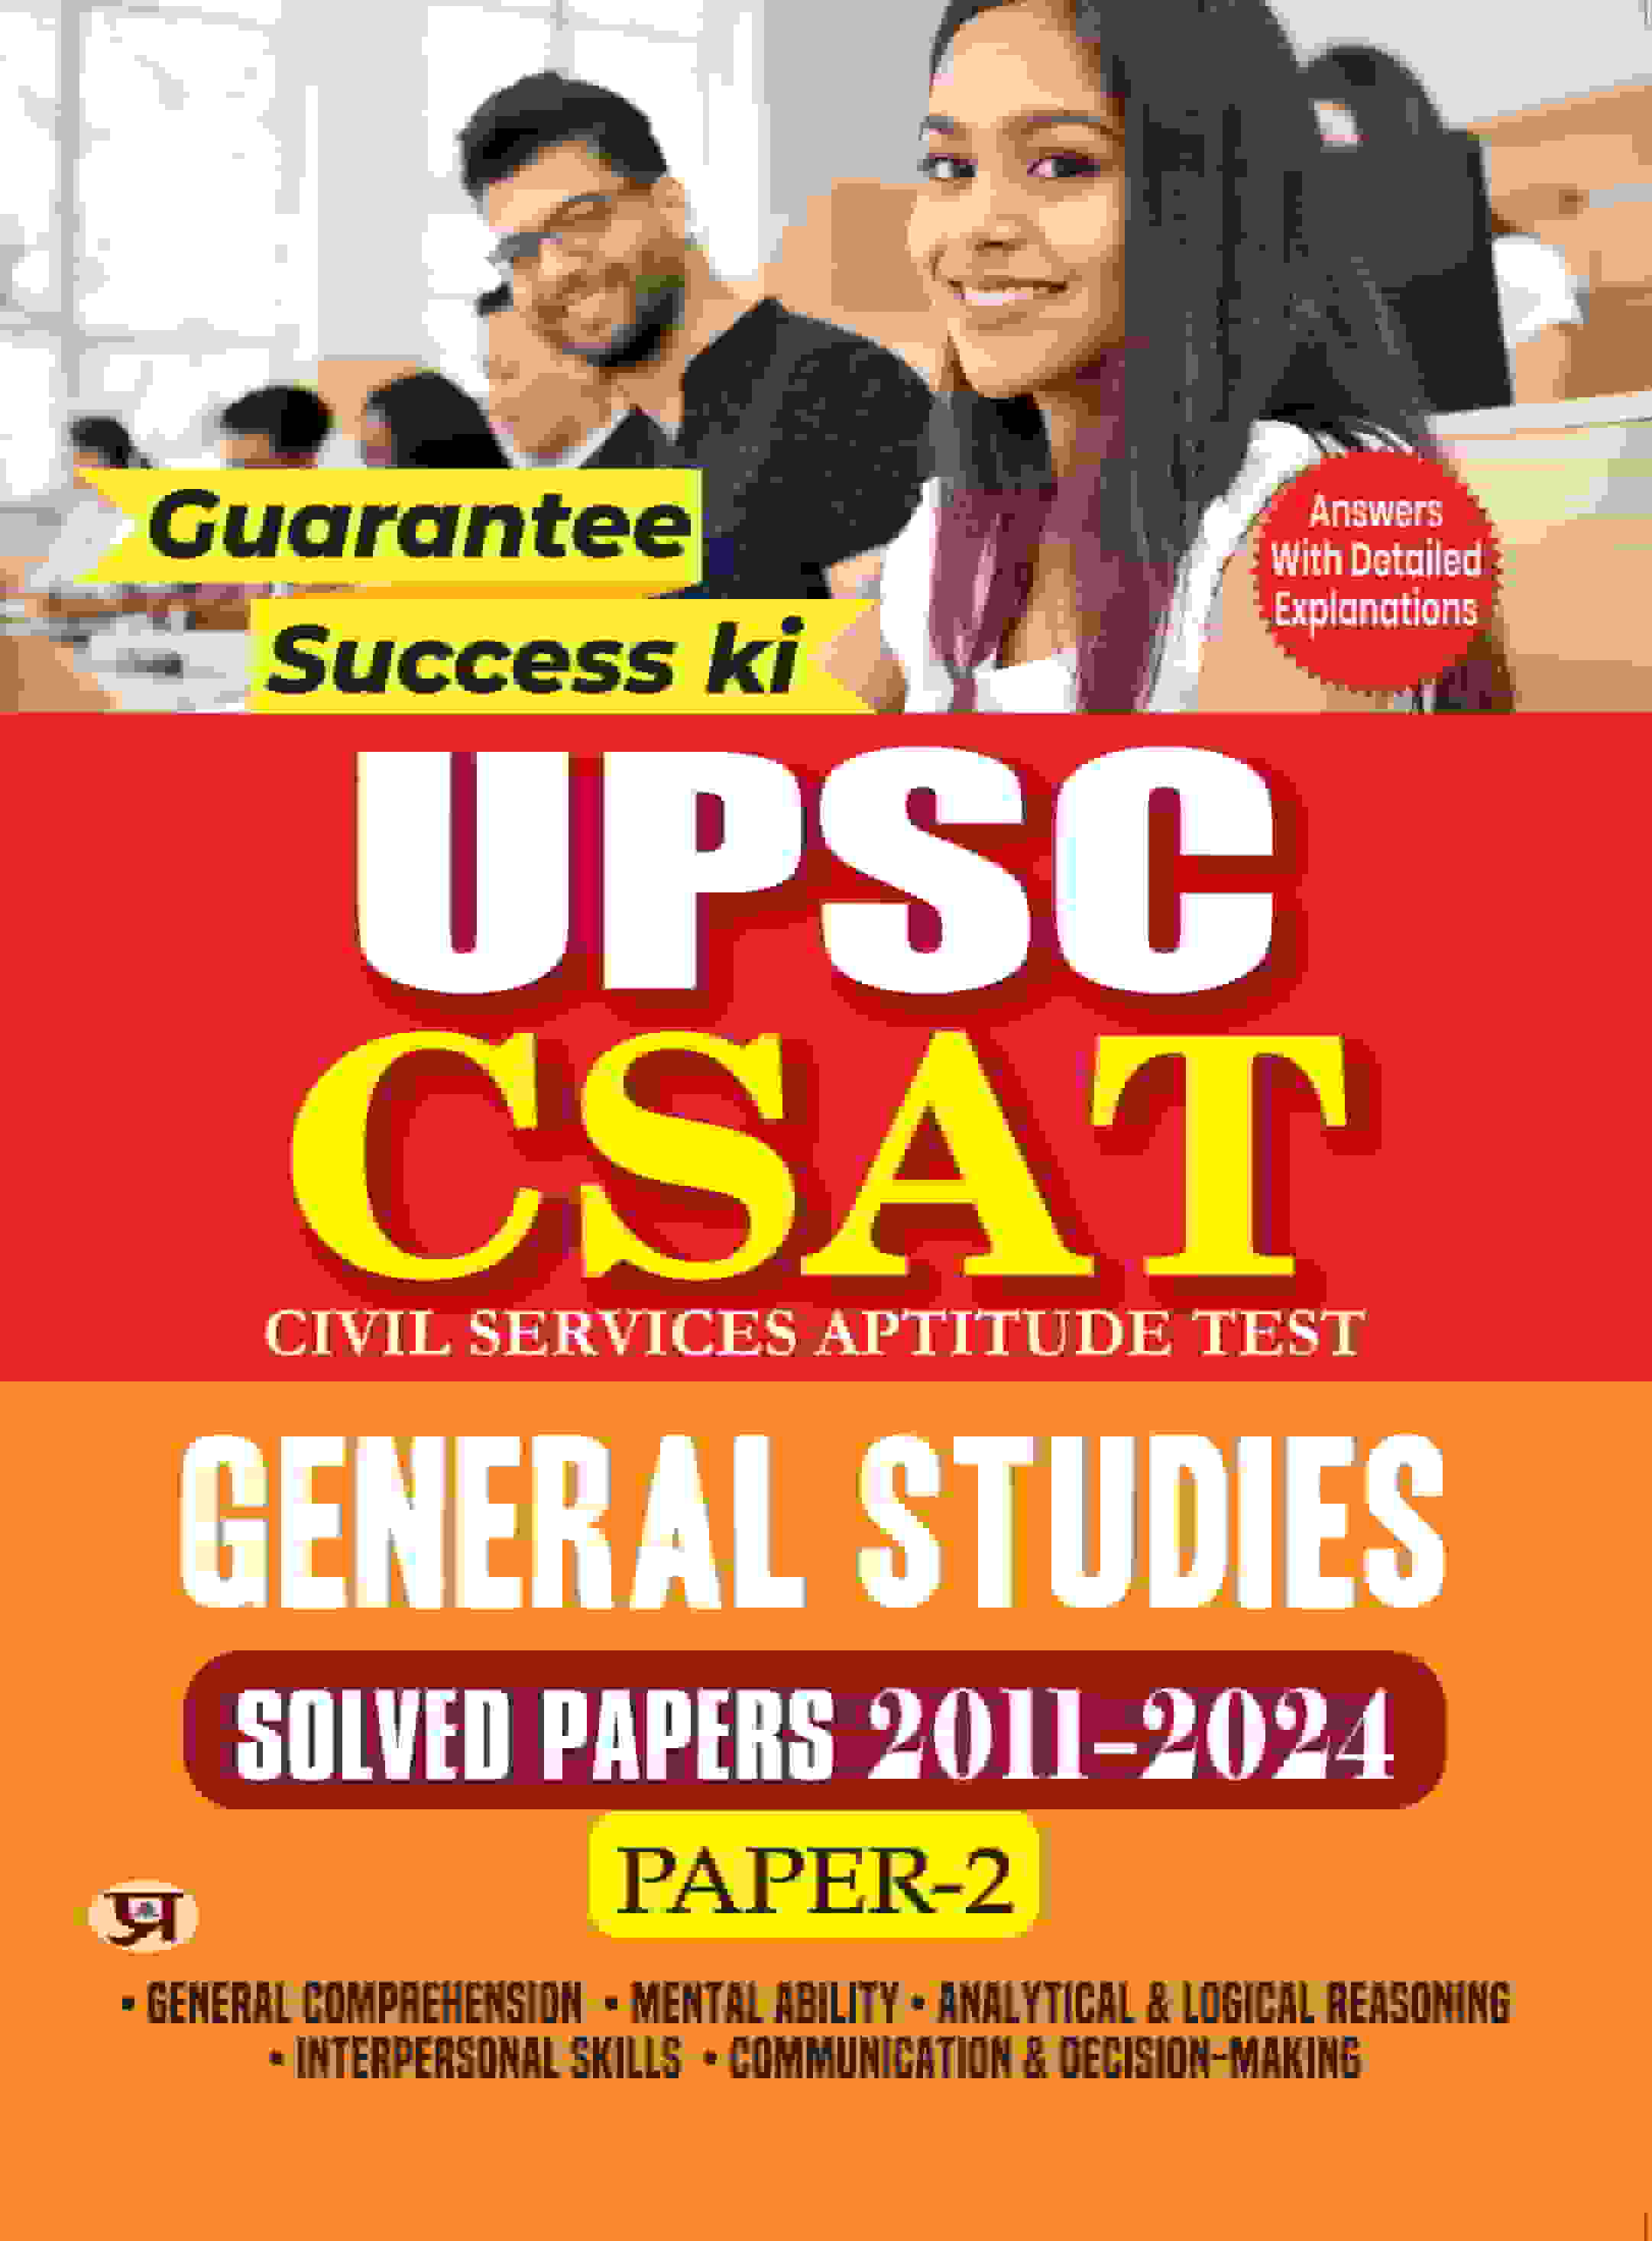 UPSC CSAT General Studies Paper 2 : 13 Years Solved Papers (2011-2024) in English